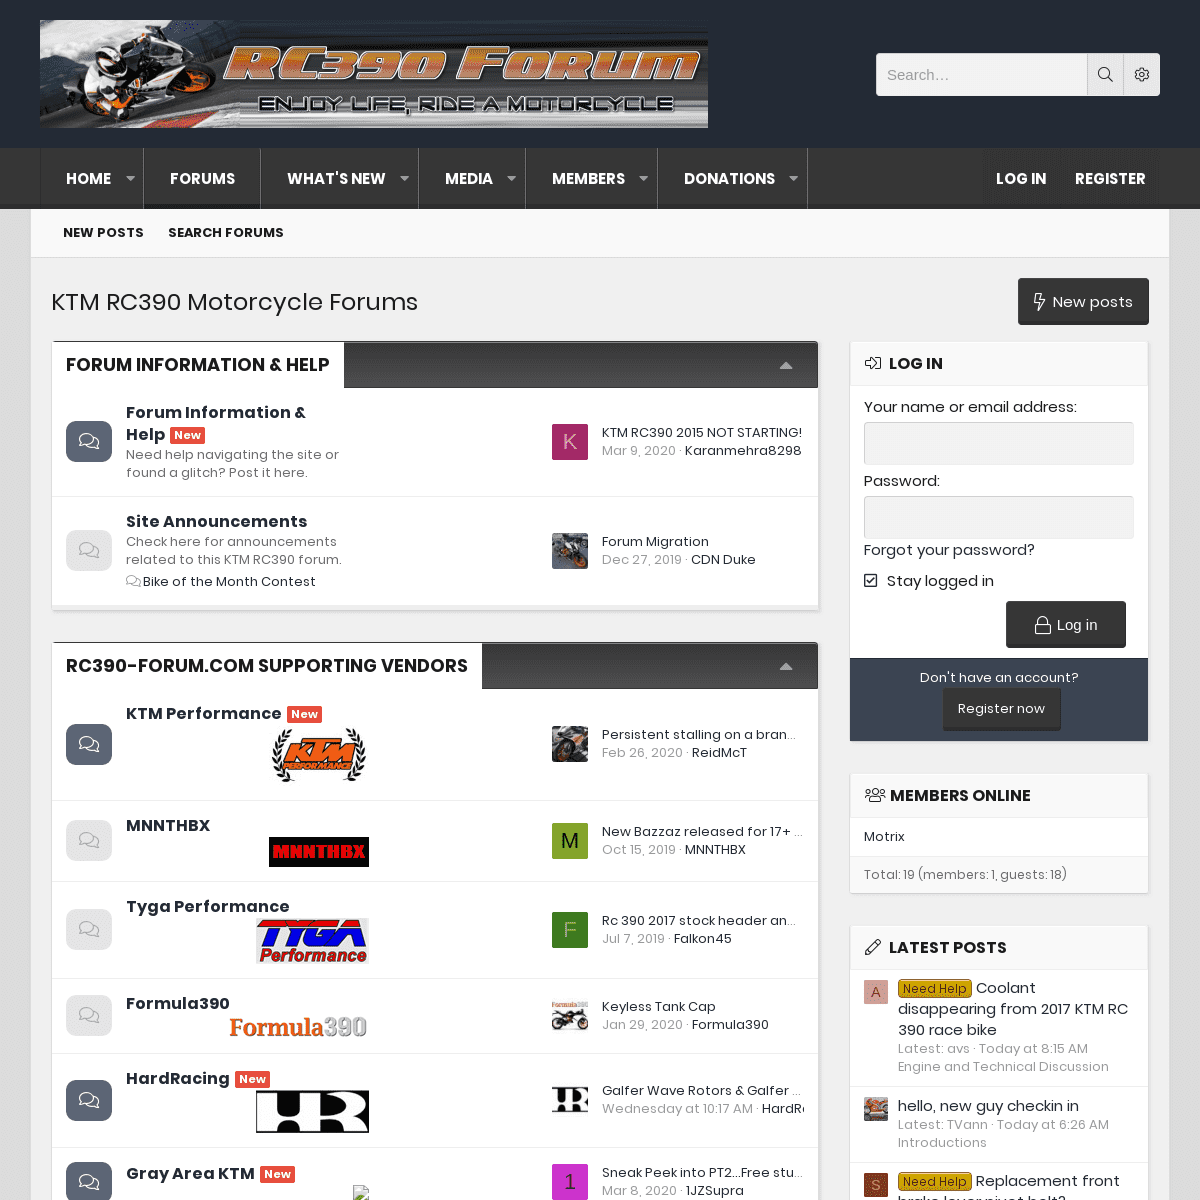 A complete backup of rc390-forum.com